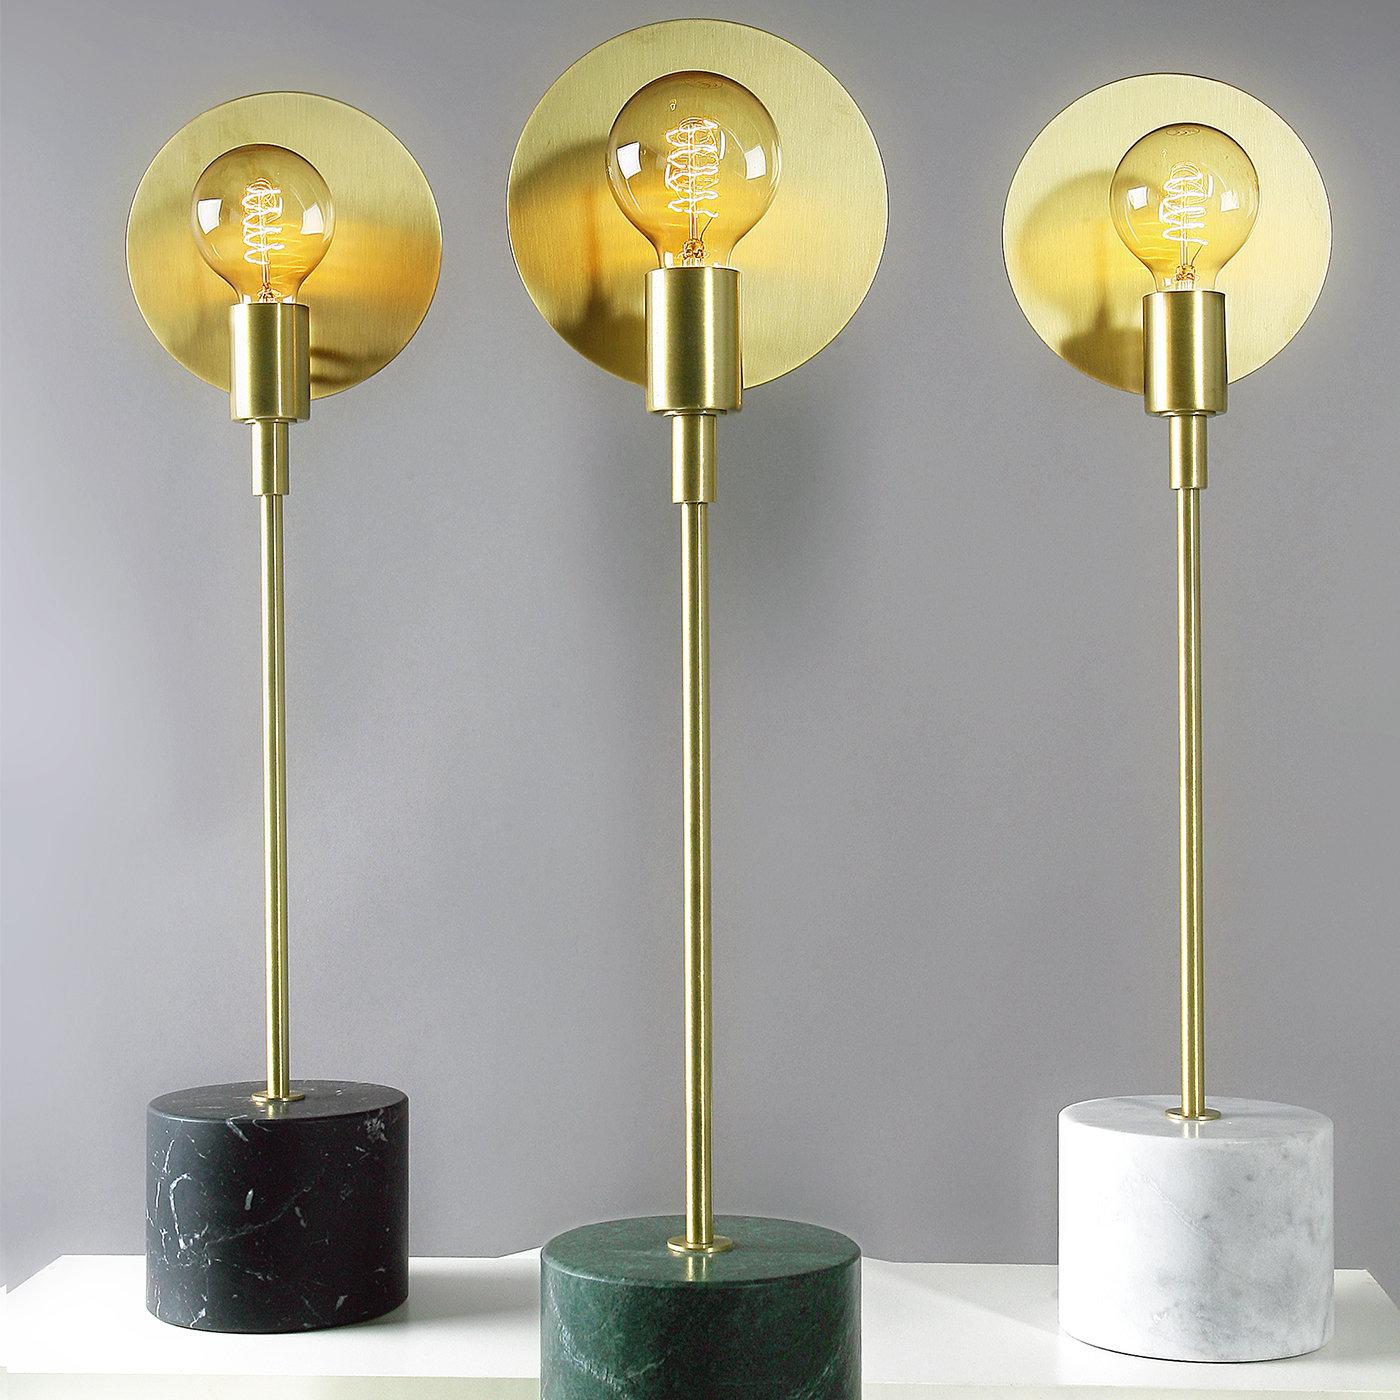 As elegant as a contemporary sculpture, this elegant table lamp focuses on the combination of pure geometric silhouettes. The combination of black marble for the cylindrical base and satin brass for the stem and disk creates a pleasing contrast,